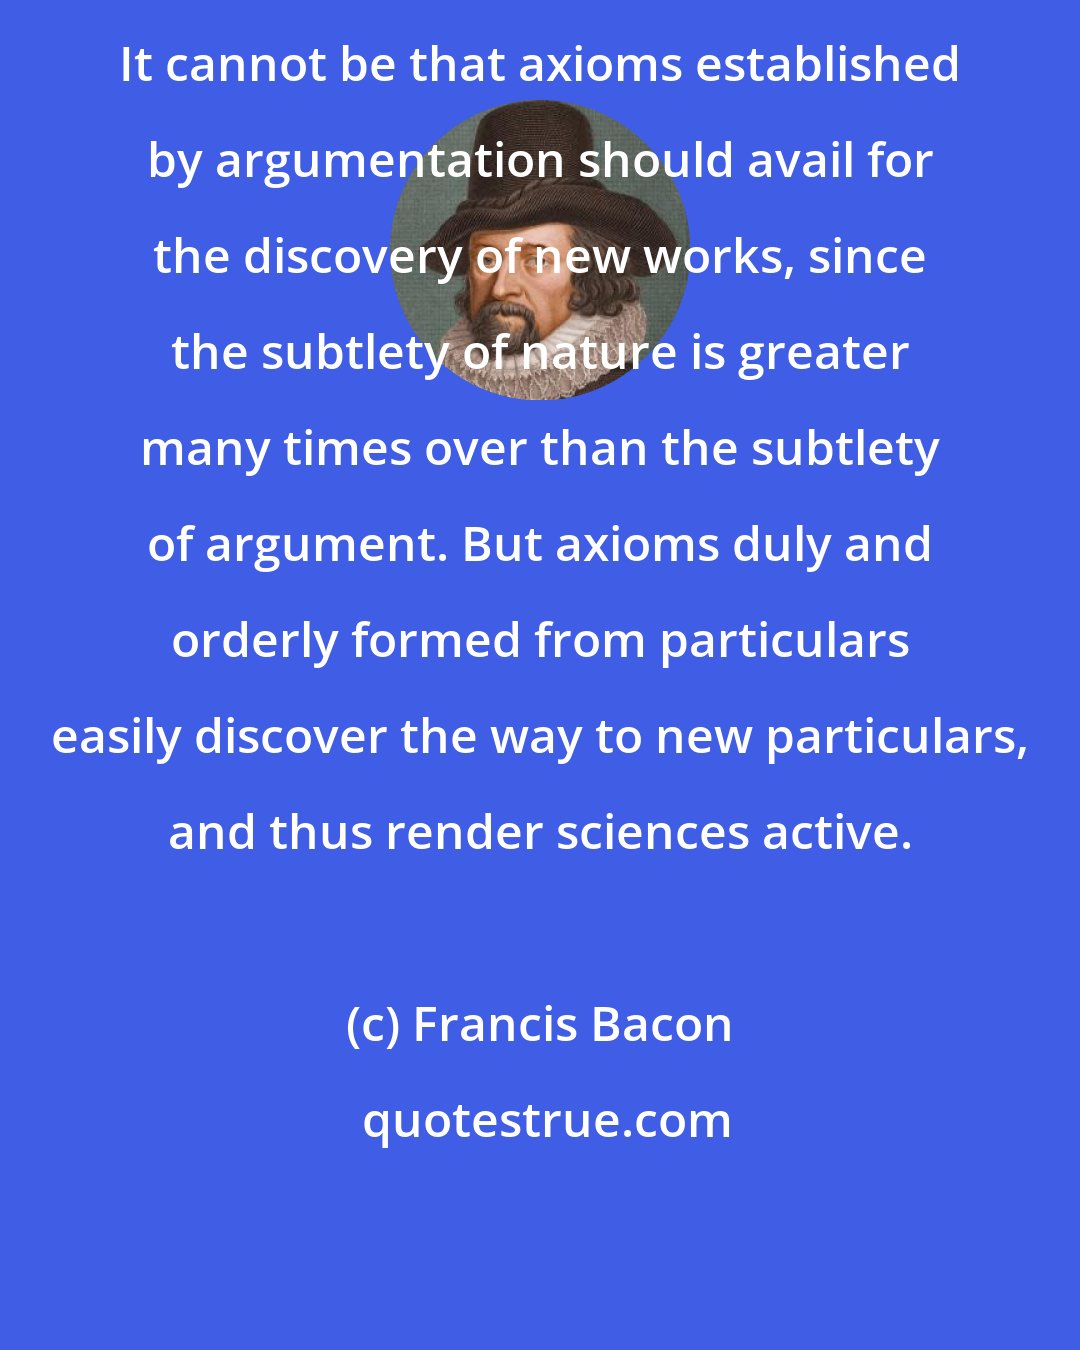 Francis Bacon: It cannot be that axioms established by argumentation should avail for the discovery of new works, since the subtlety of nature is greater many times over than the subtlety of argument. But axioms duly and orderly formed from particulars easily discover the way to new particulars, and thus render sciences active.